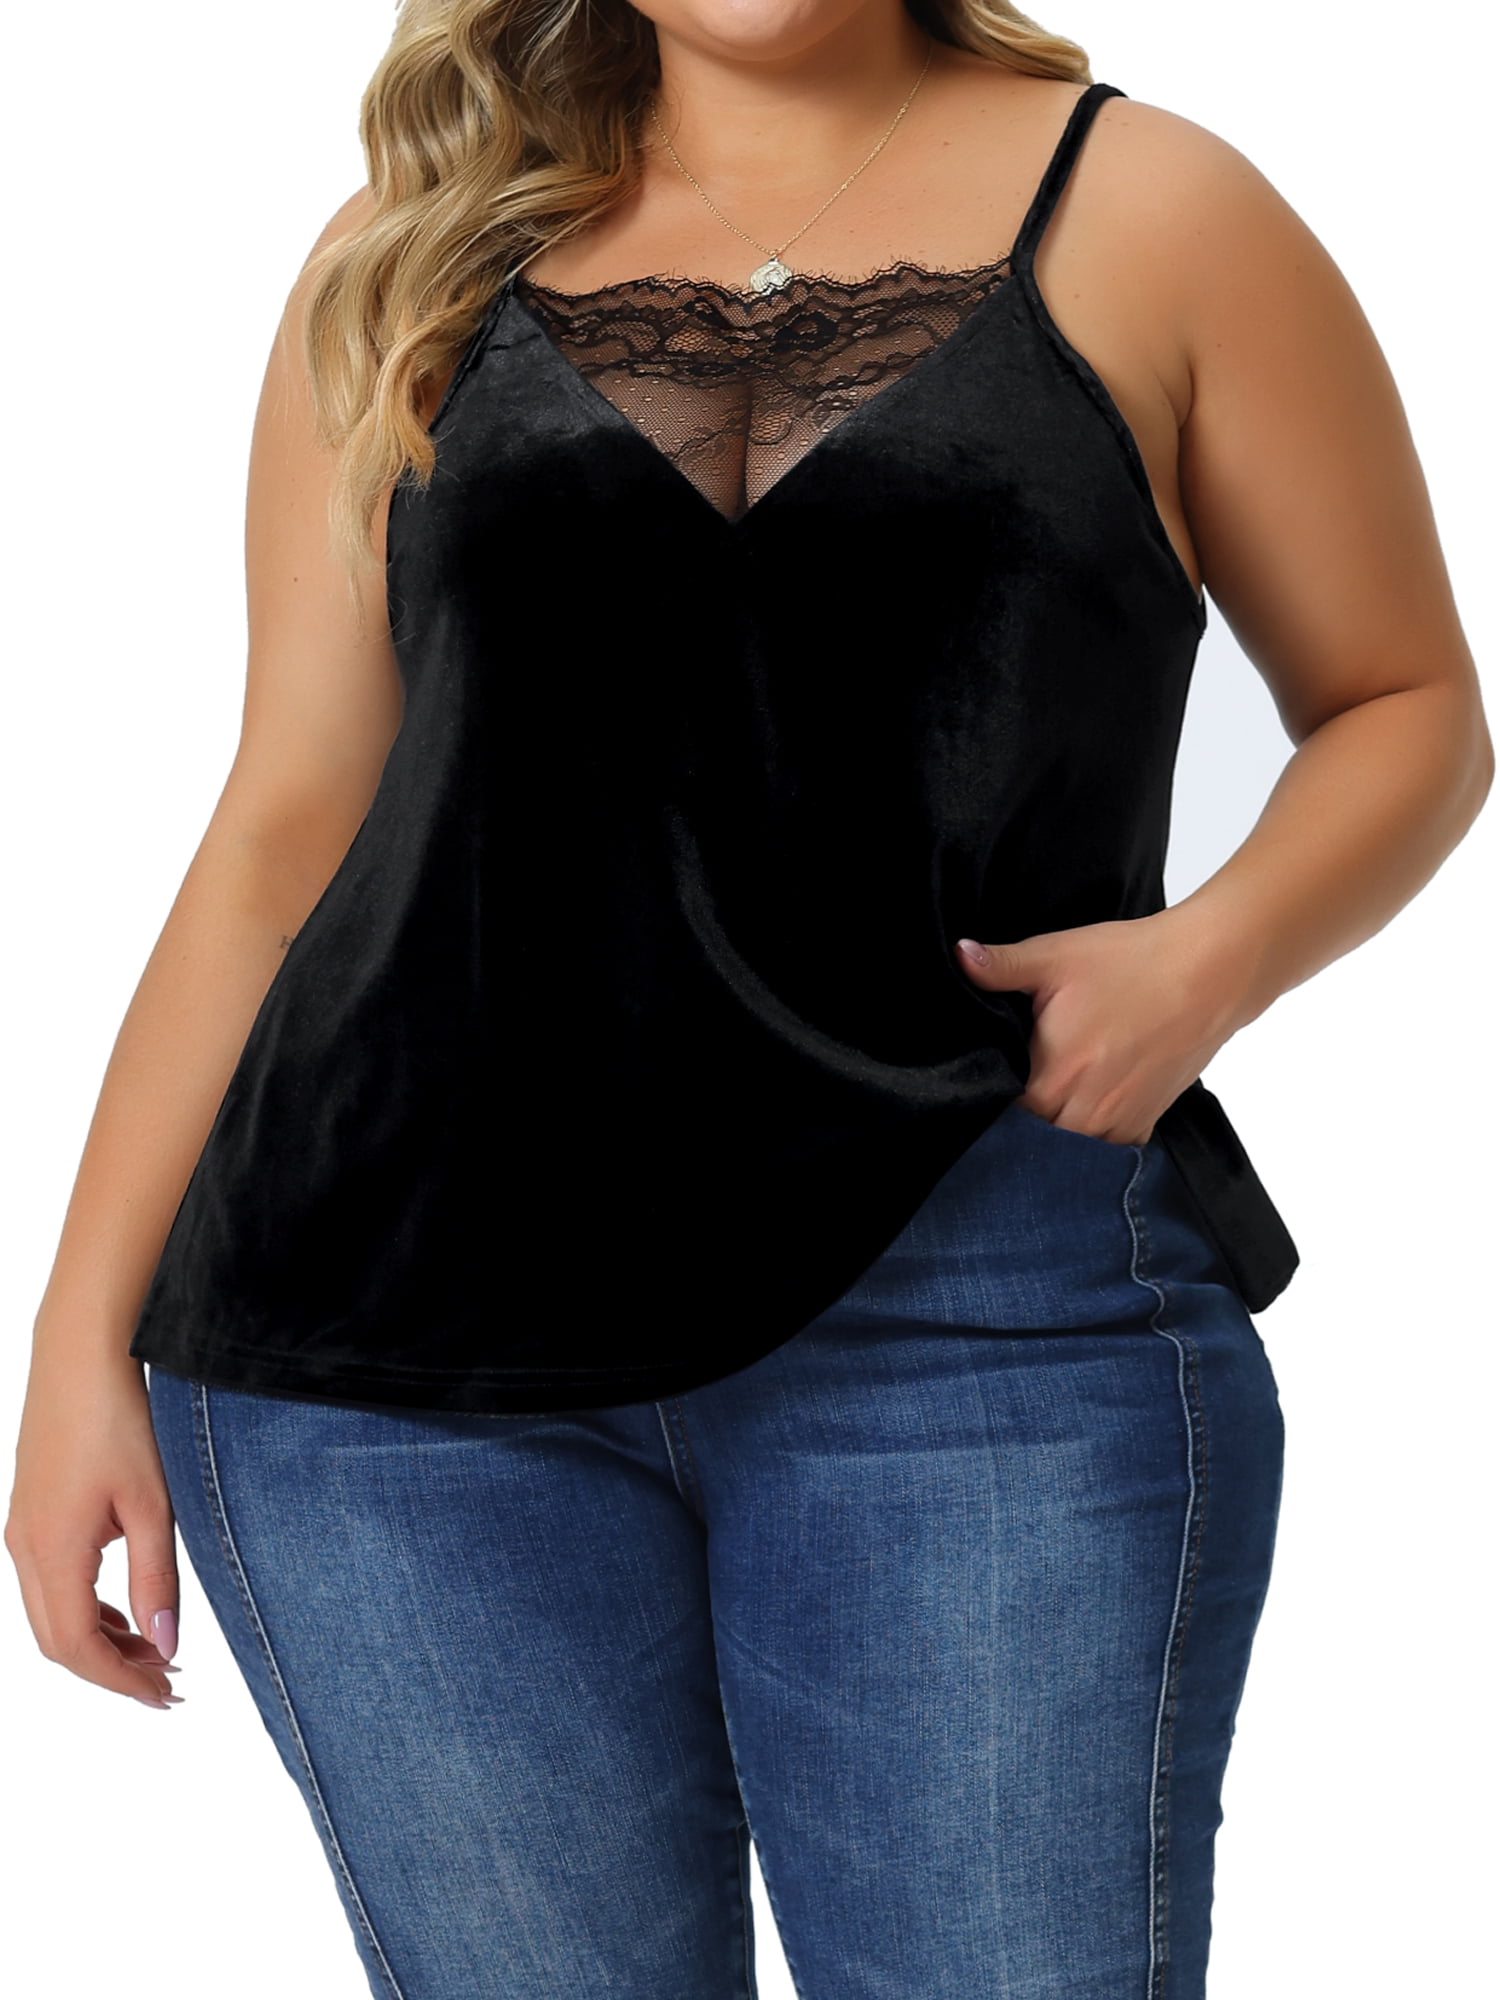 Qoo10 - Camisole Lace Top : Women's Clothing